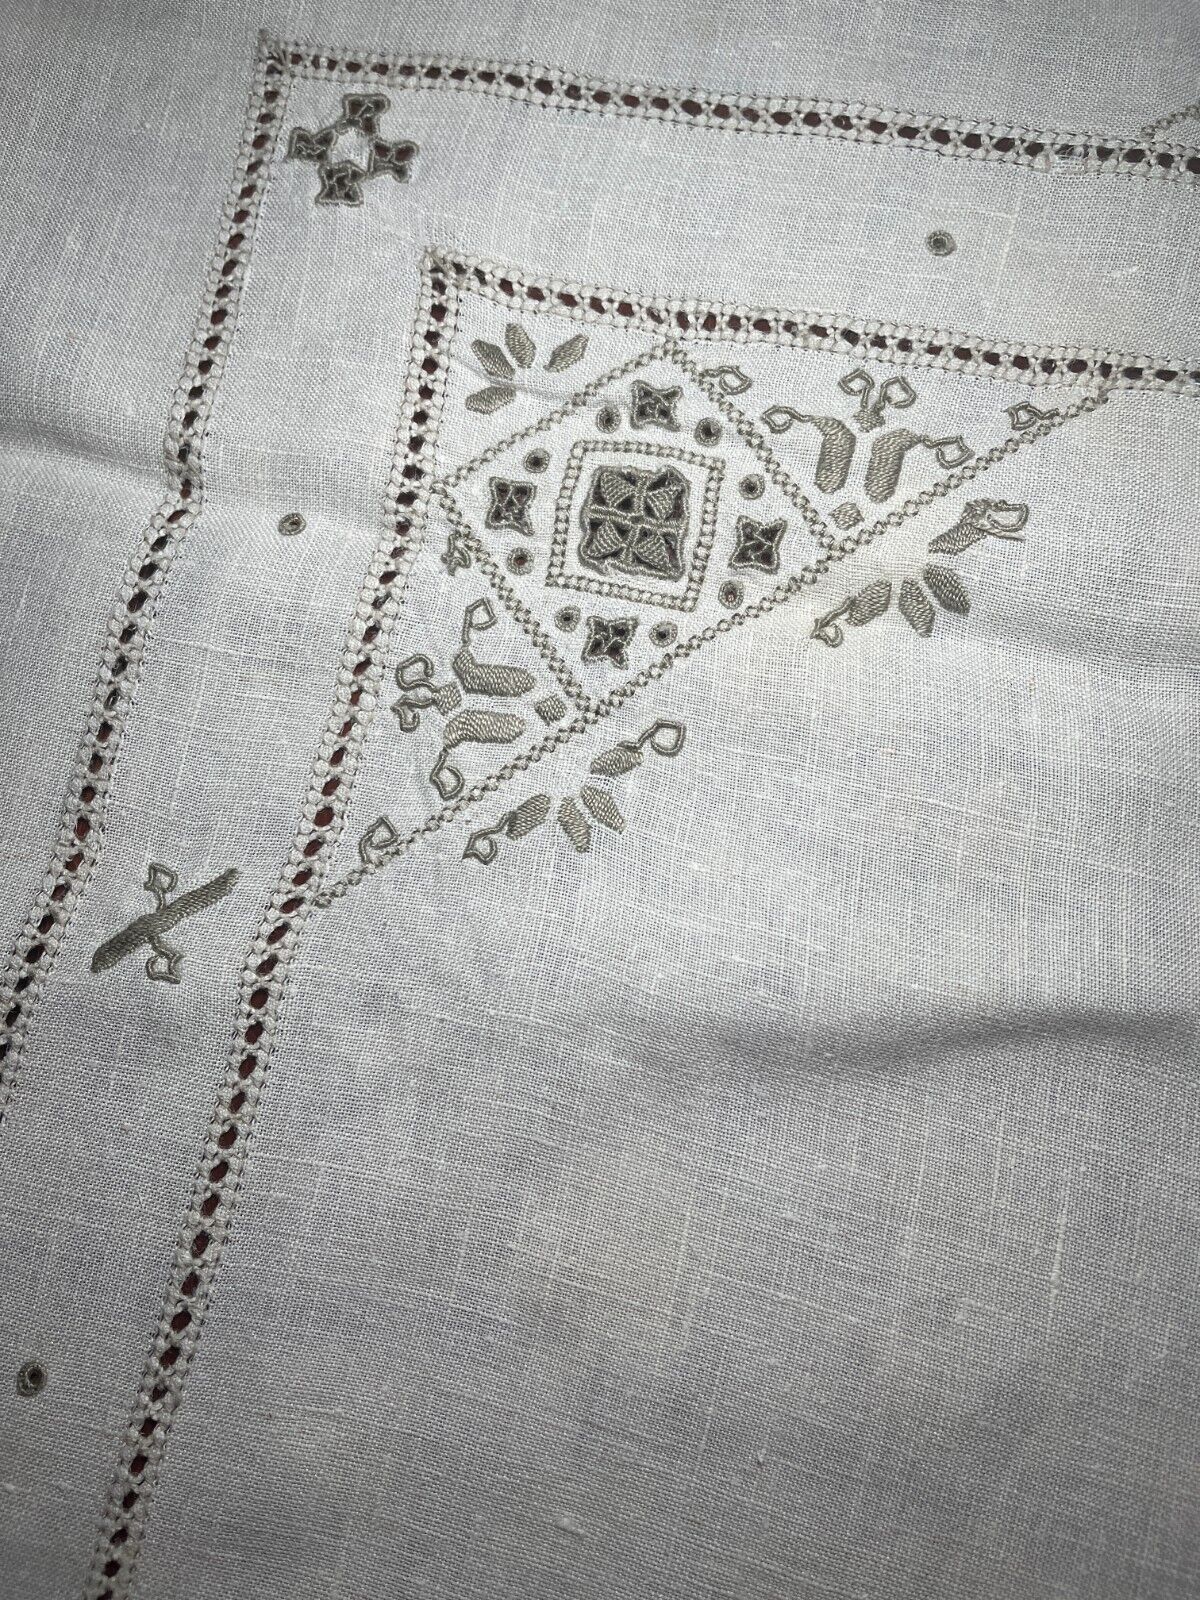 VINTAGE MADEIRA TABLECLOTH HAND EMBROIDERY CUTWORK LINEN LARGE BANQUET 8'x5.5'